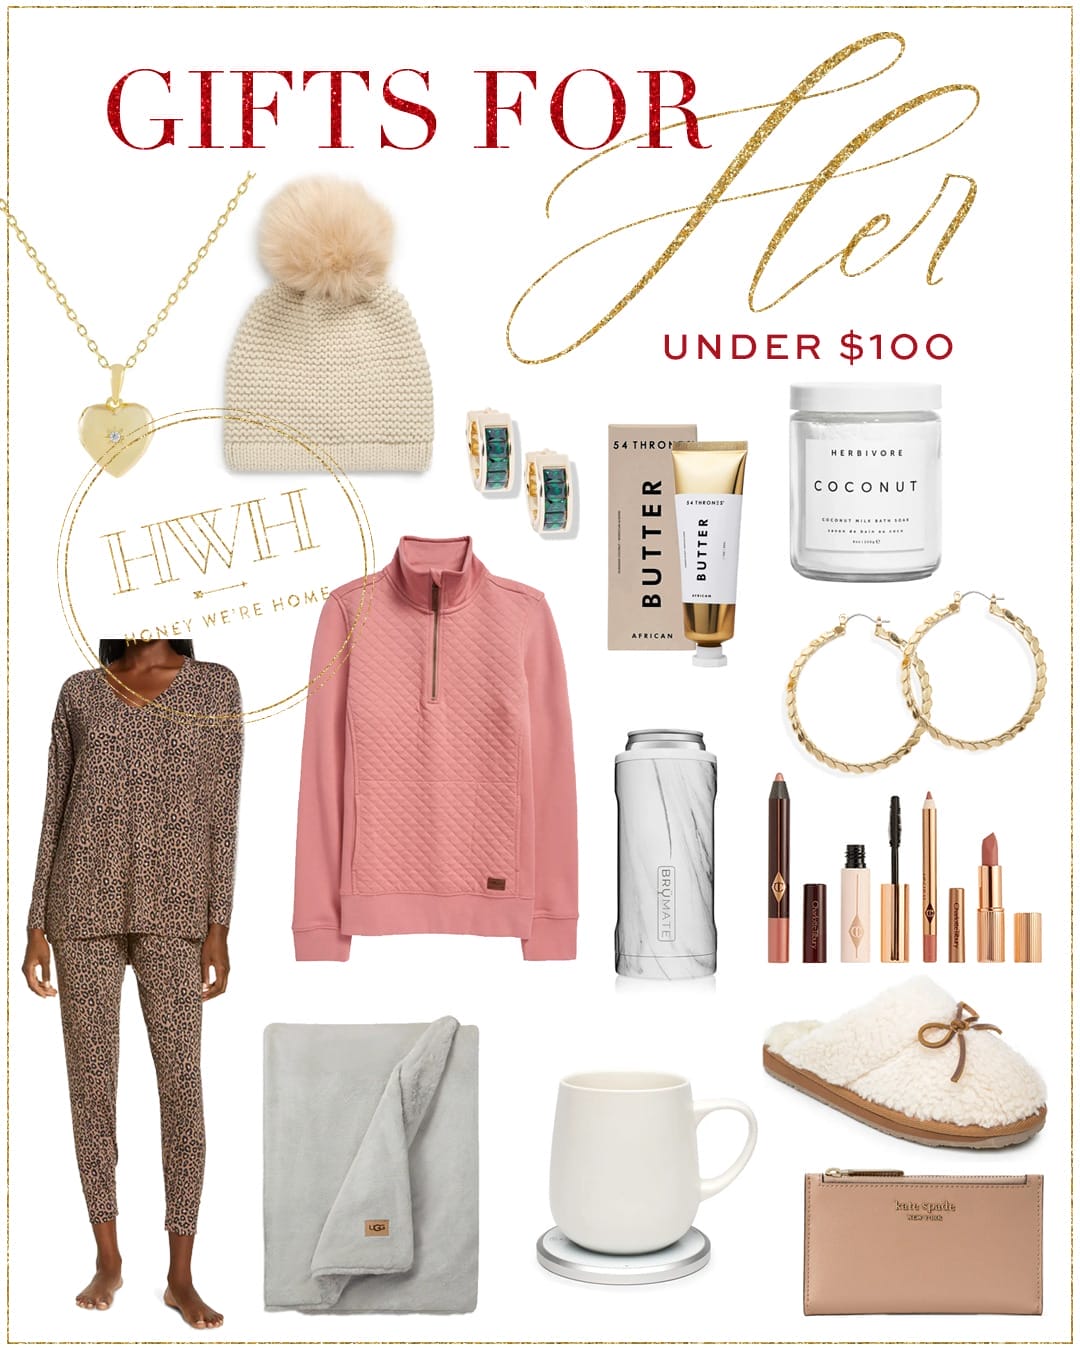 Just (the BEST) Sales & Gifts for Her Under $100